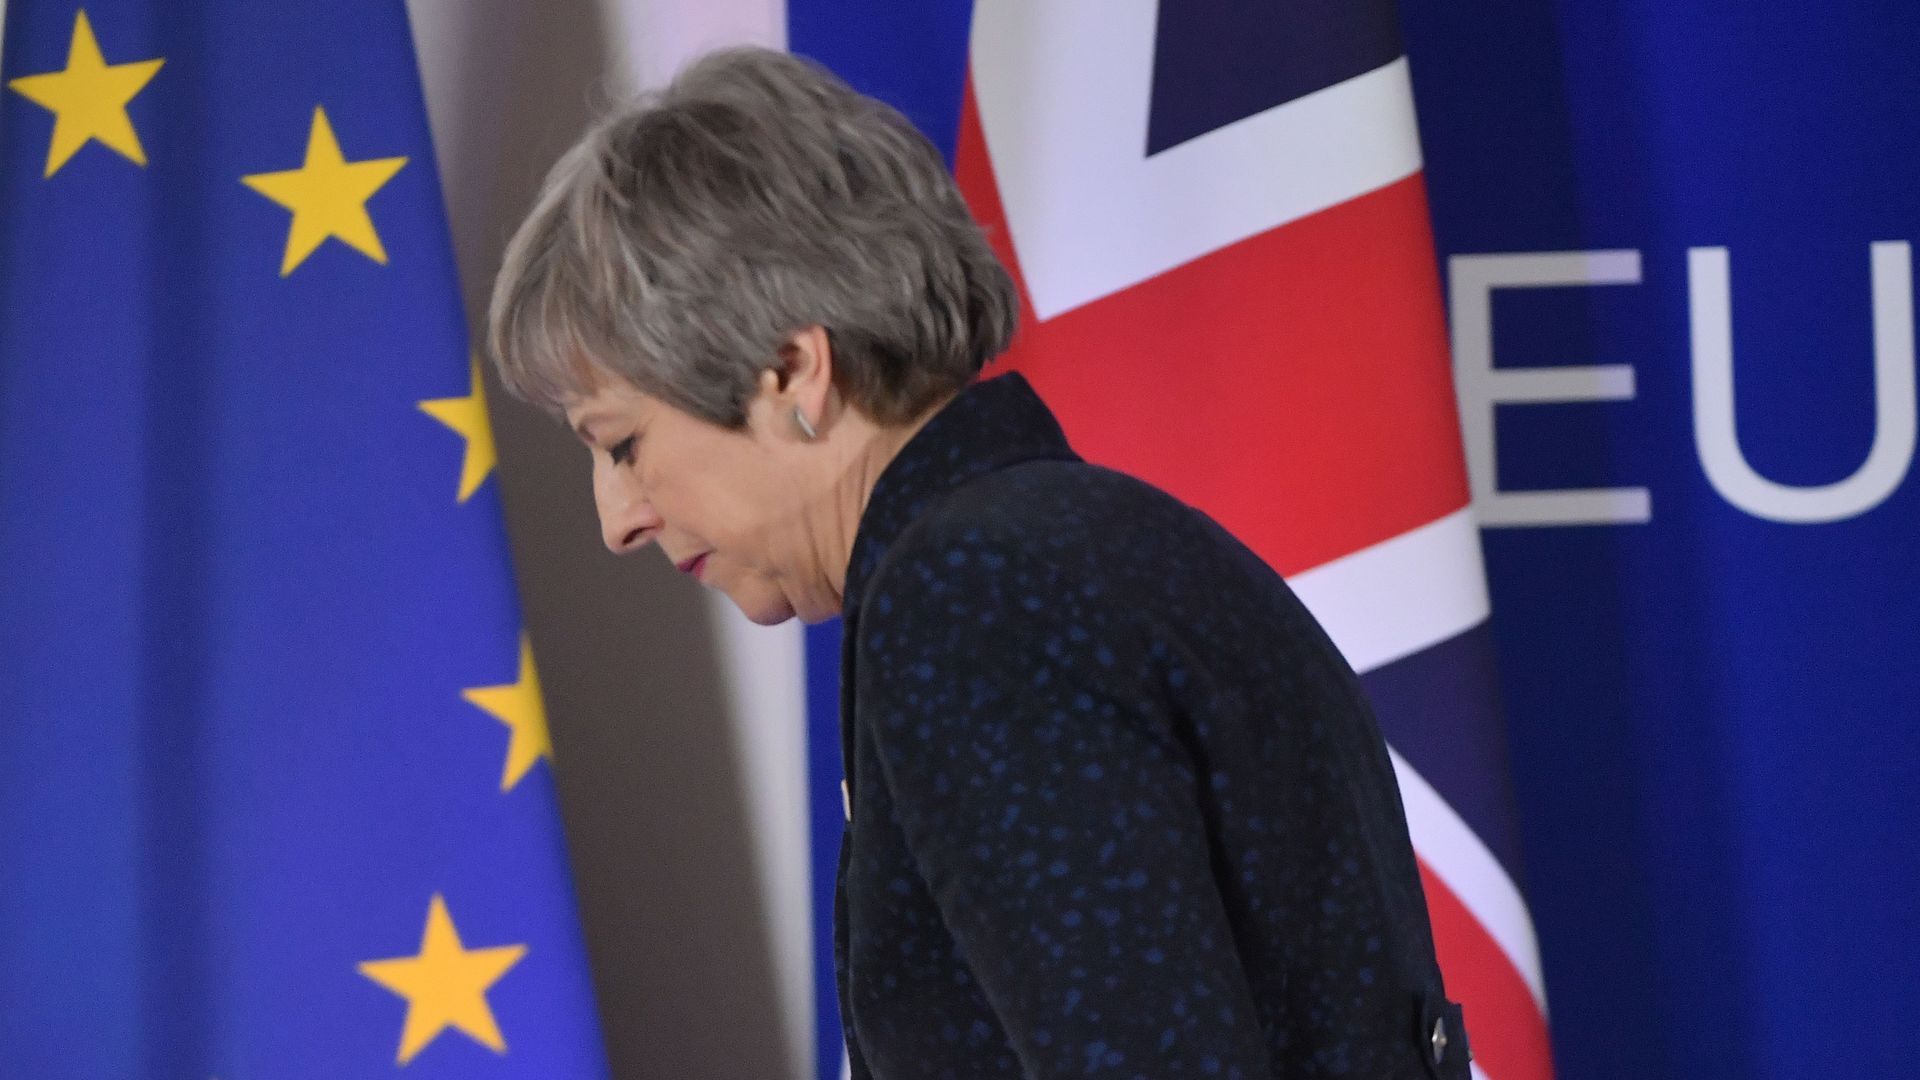 British Prime Minister Theresa May has temporarily lost control of the Brexit process.